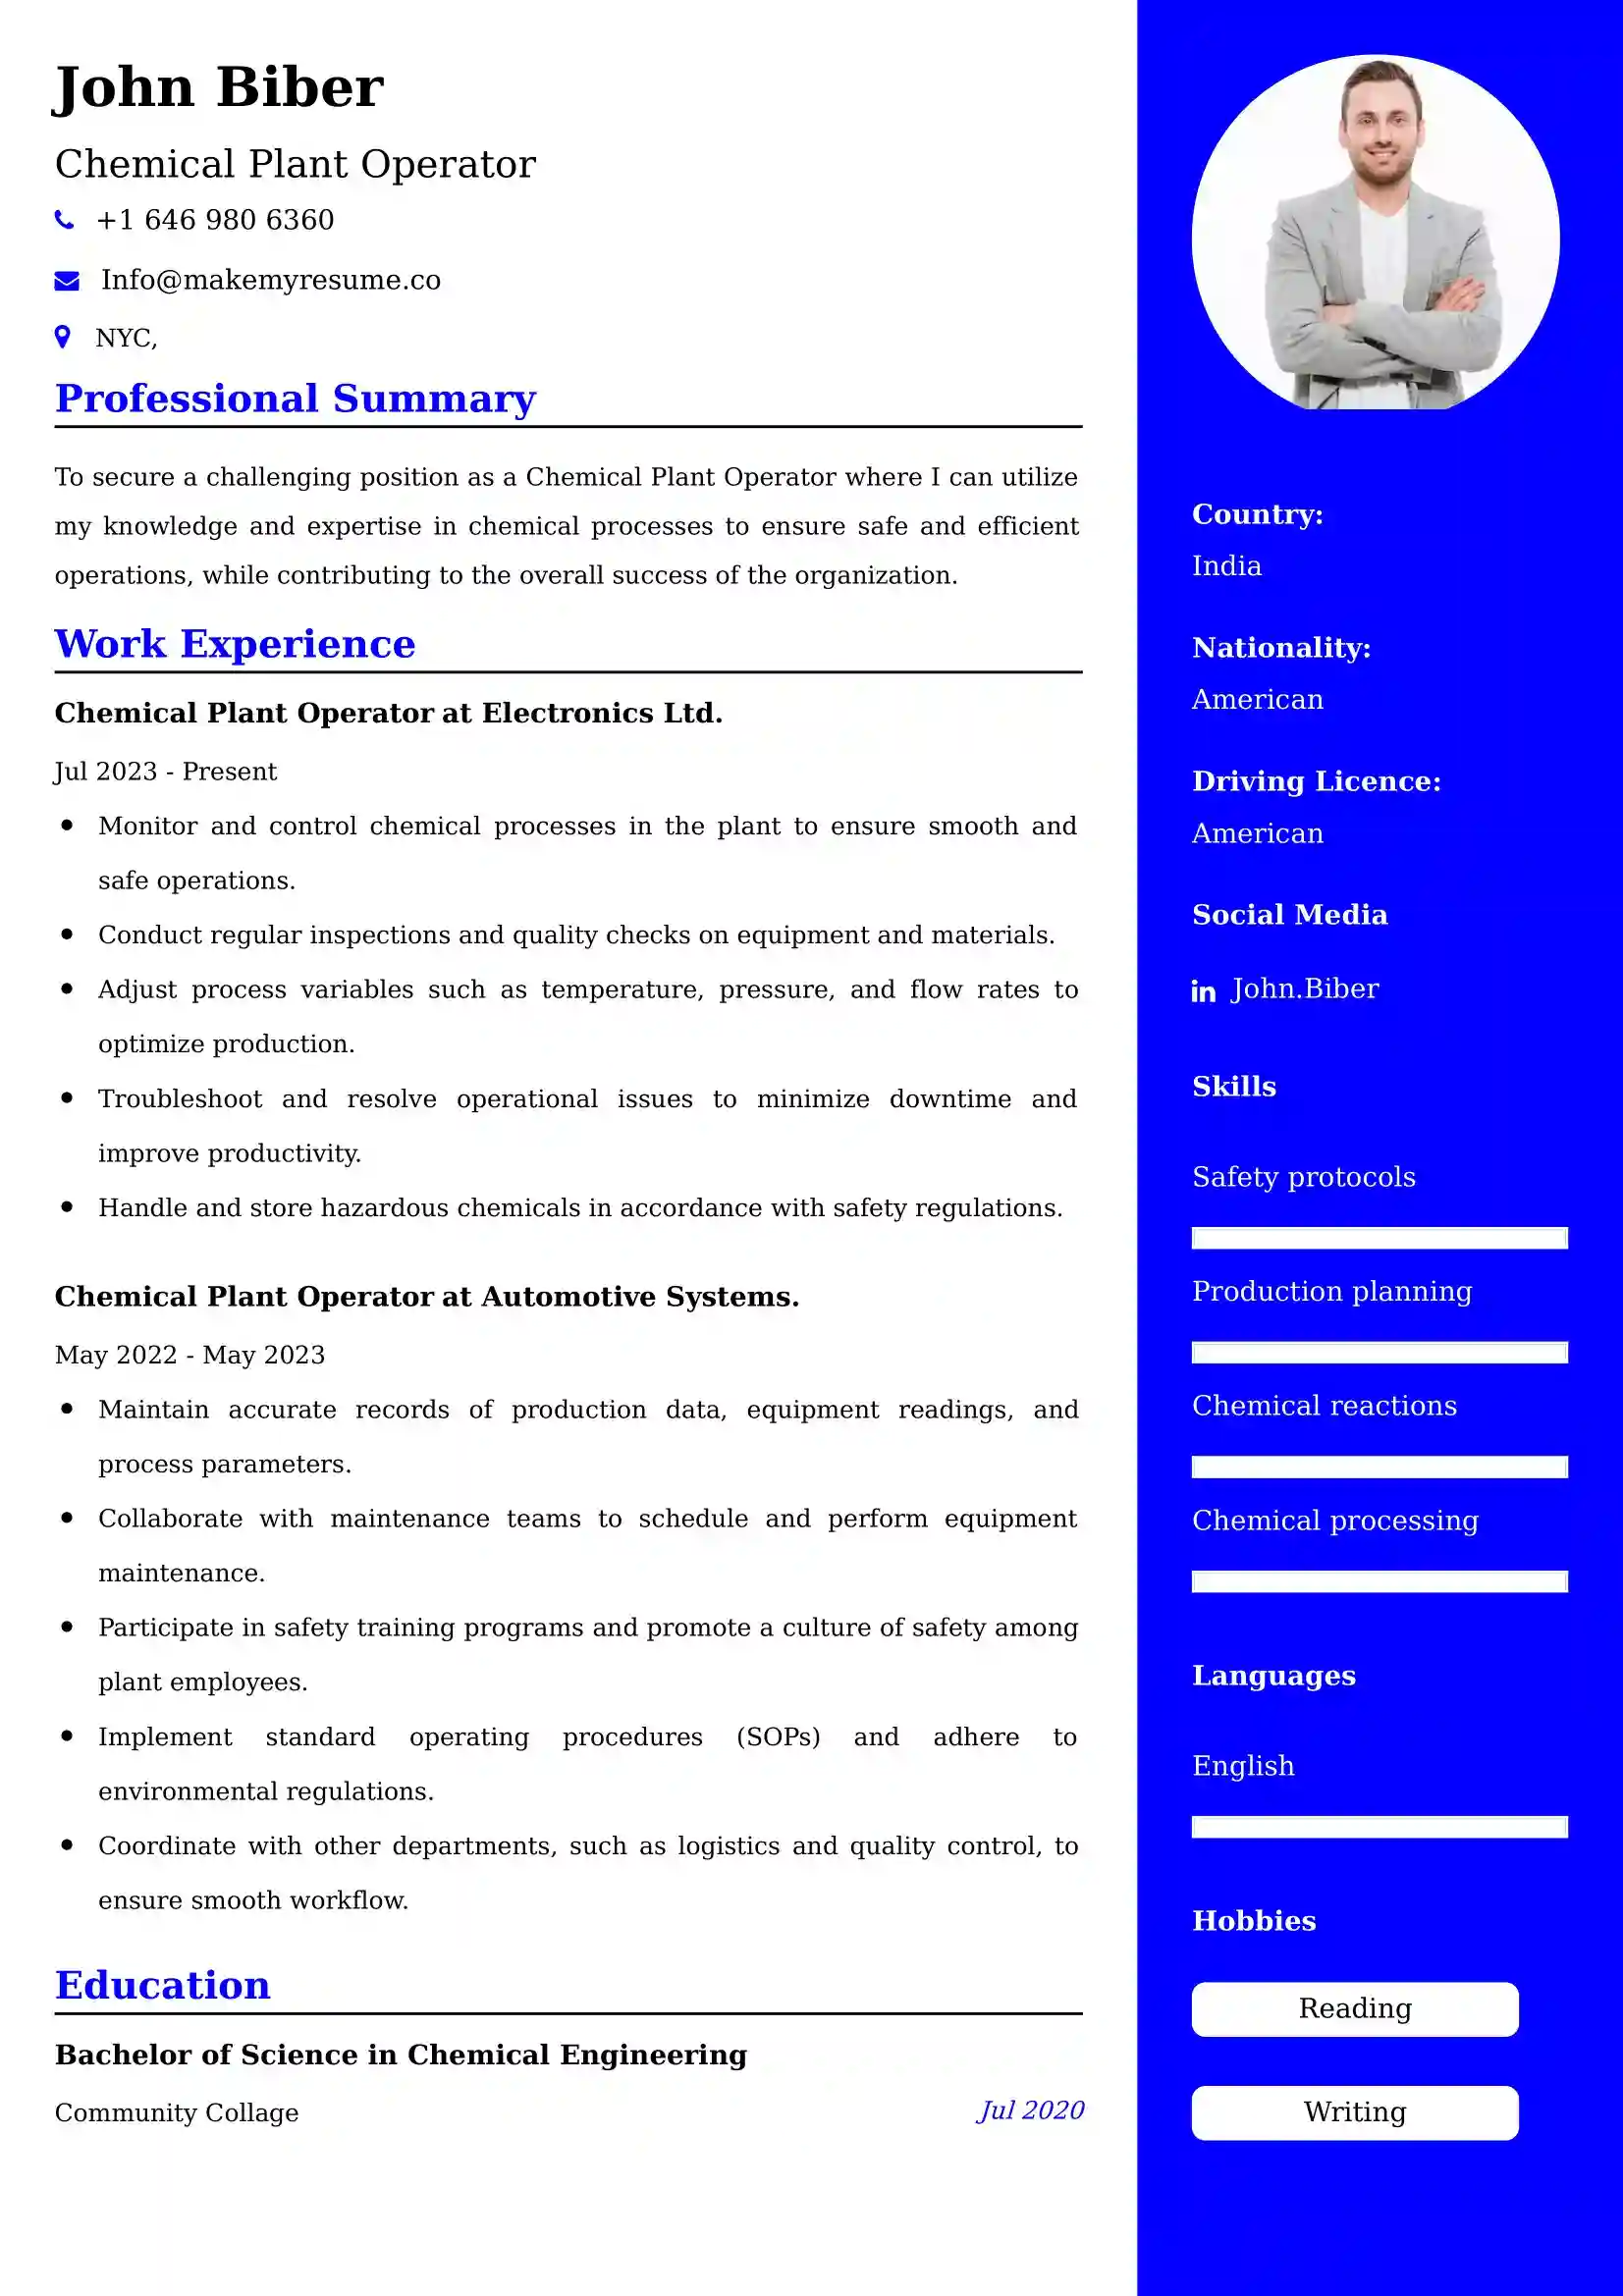 Chemical Plant Operator Resume Examples for UK Jobs - Tips and Guide